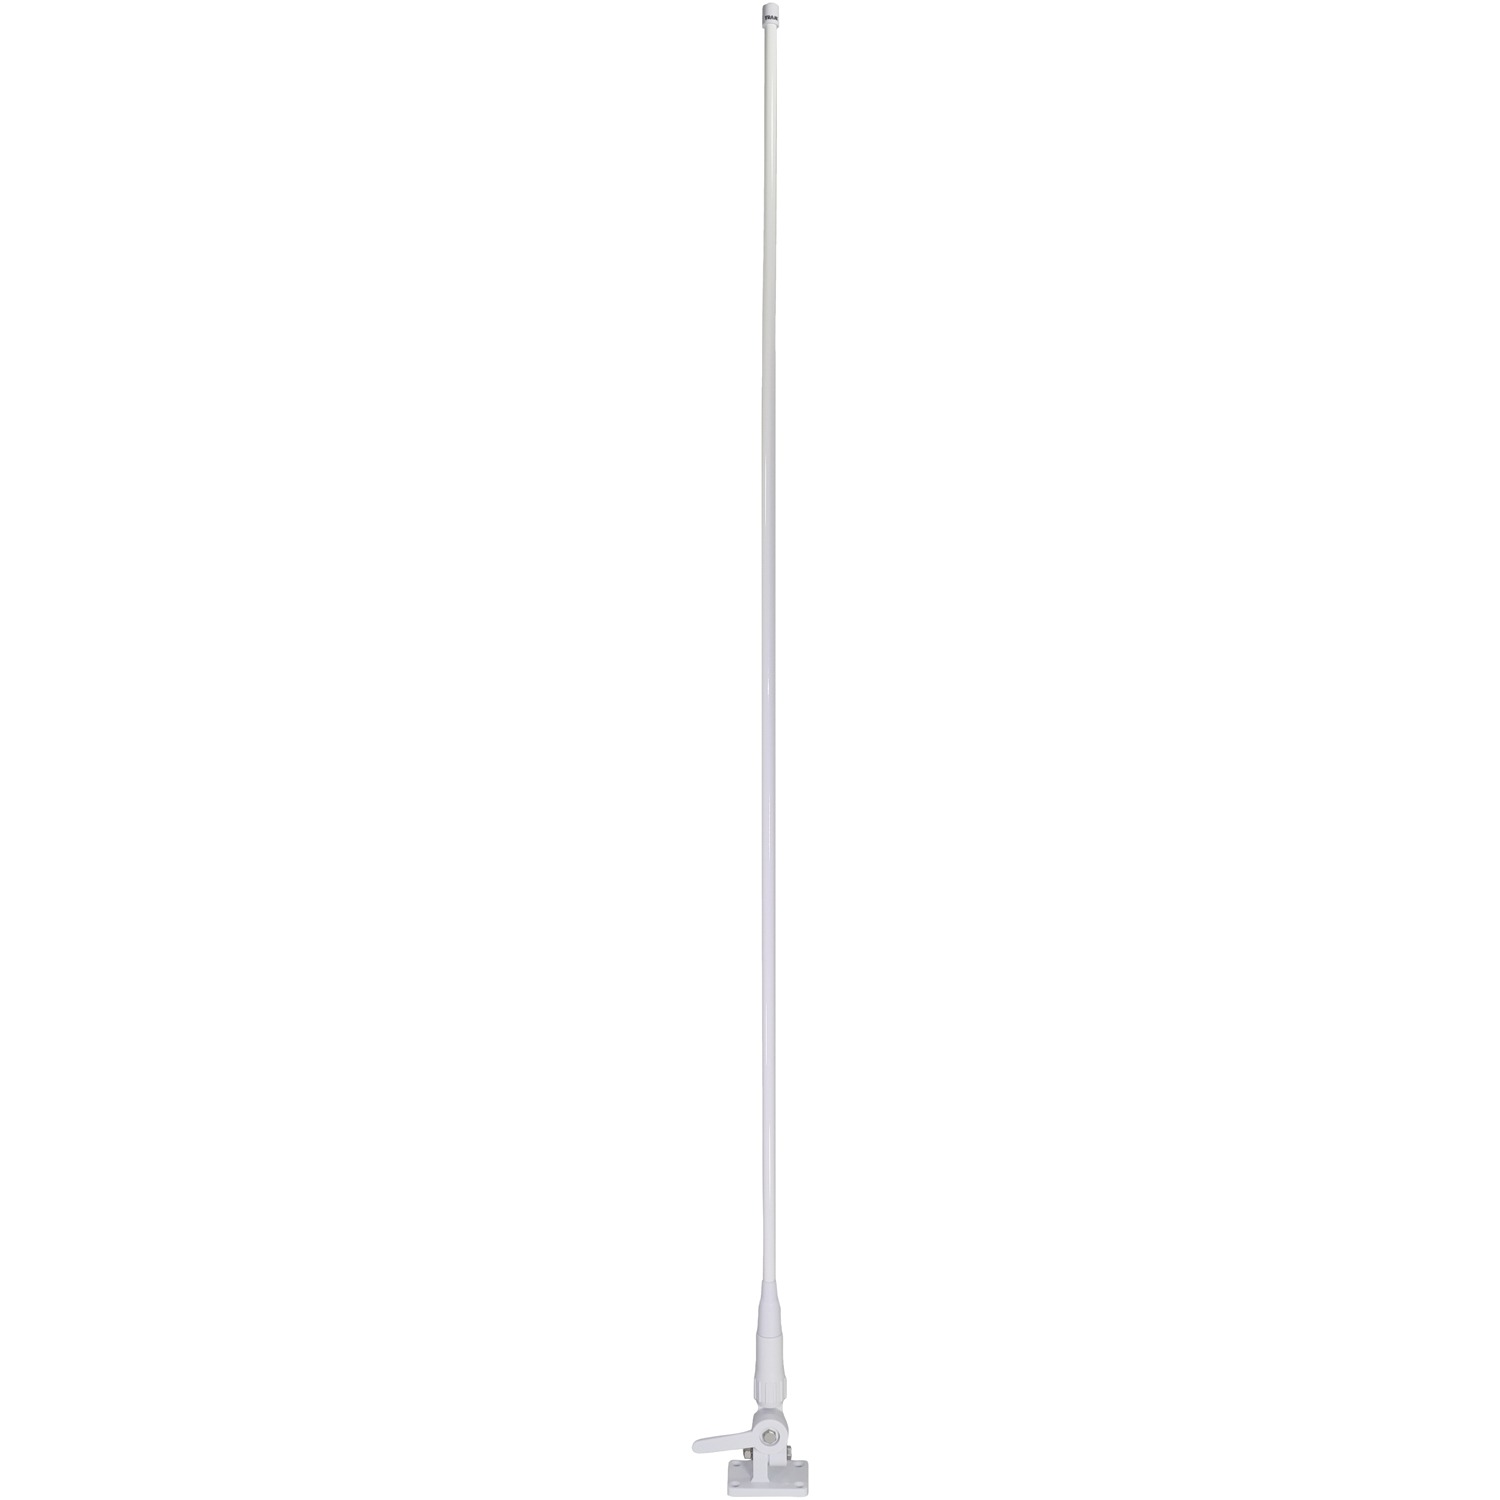 Tram 1616 5Ft VHF 3DBD Gain Marine Antenna With Cable Built-In To Ratchet Mount - image 1 of 5